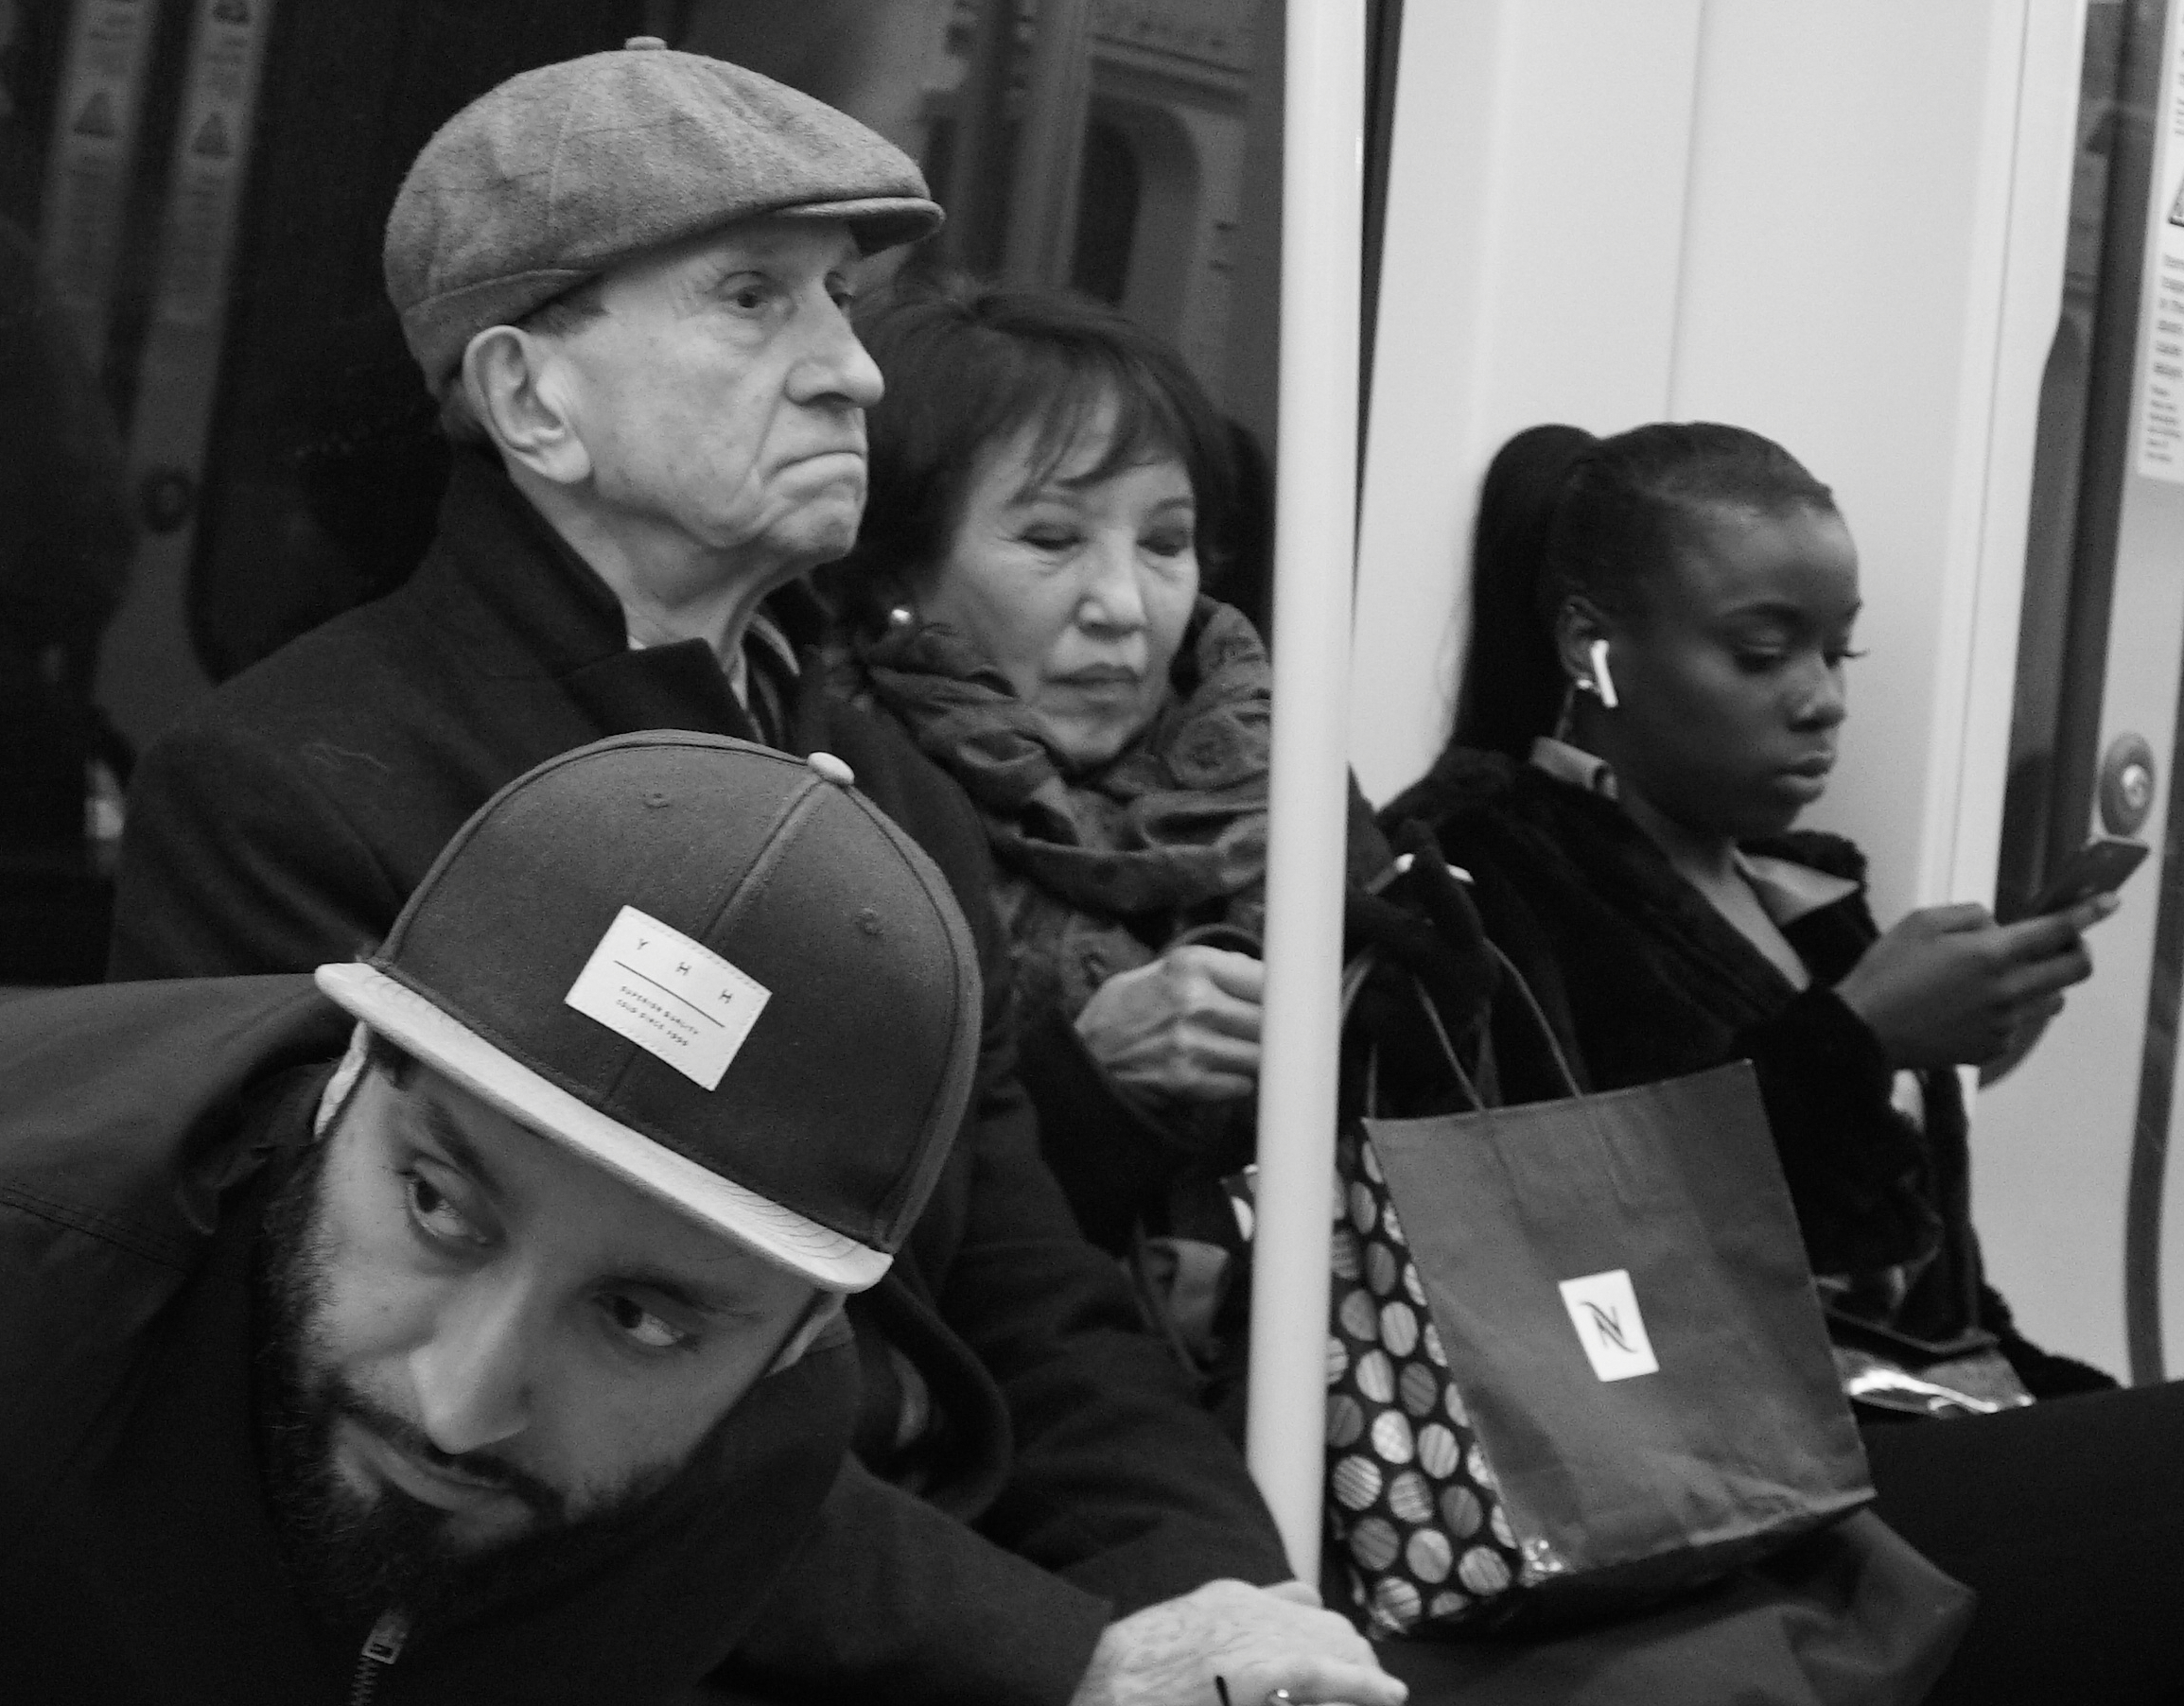 Ethnicities on the subway...